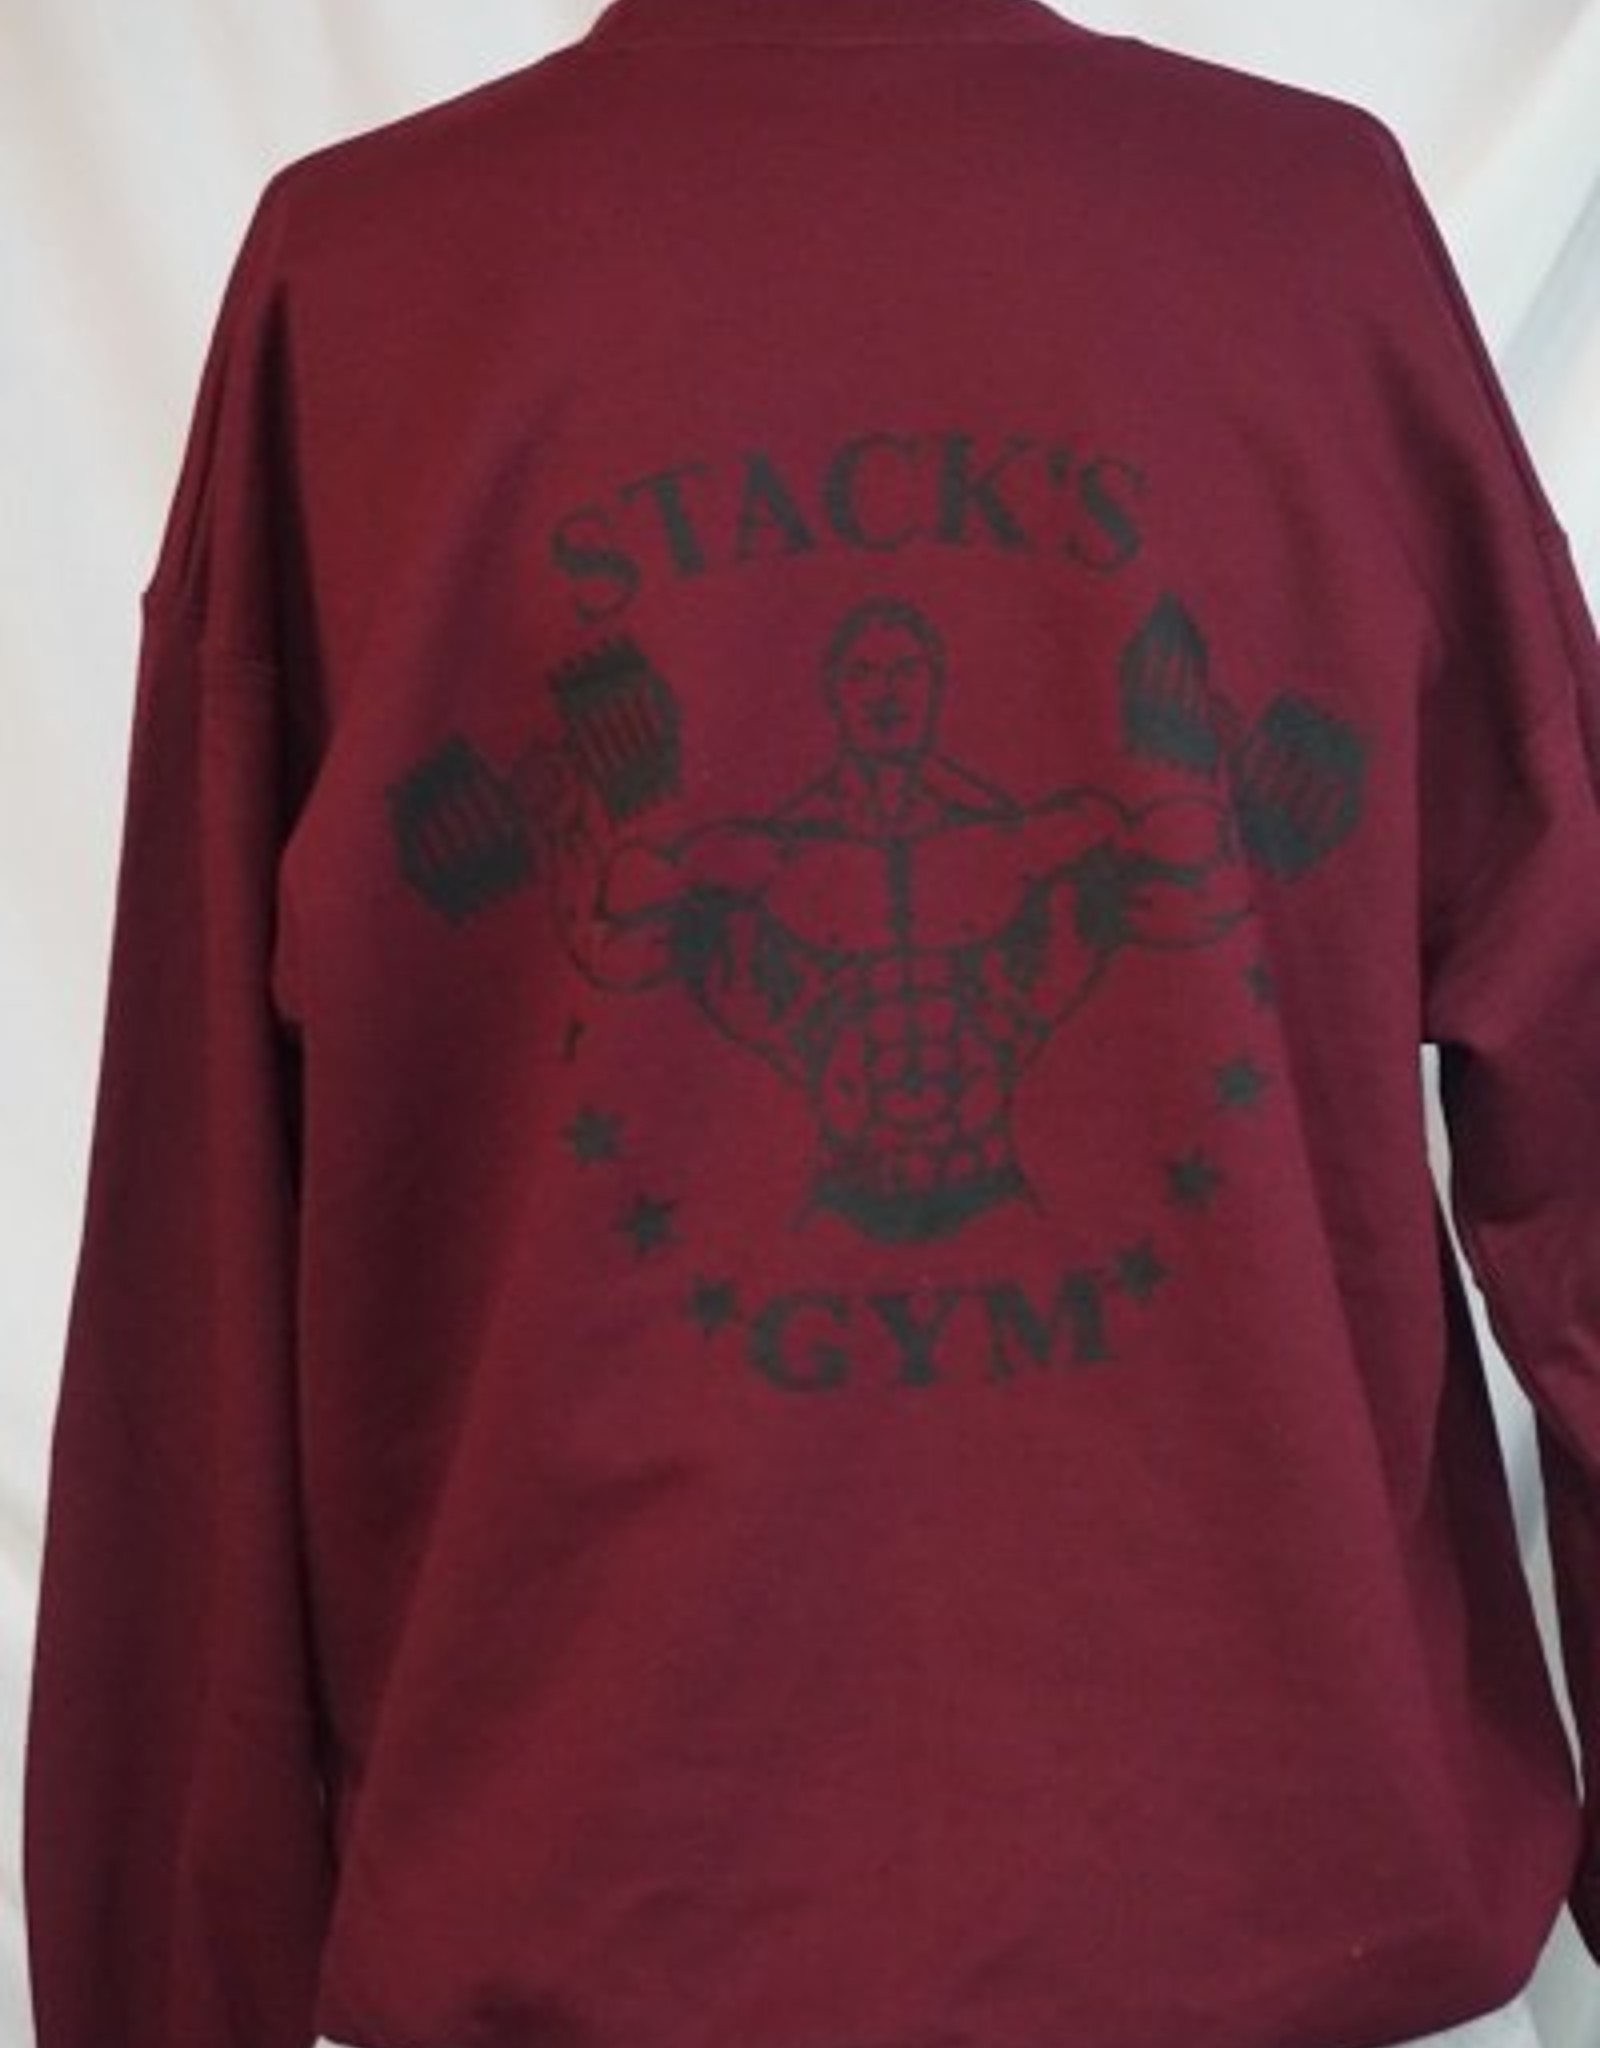 Stack's Gym Sweaters - Dumbbell Logo on Back